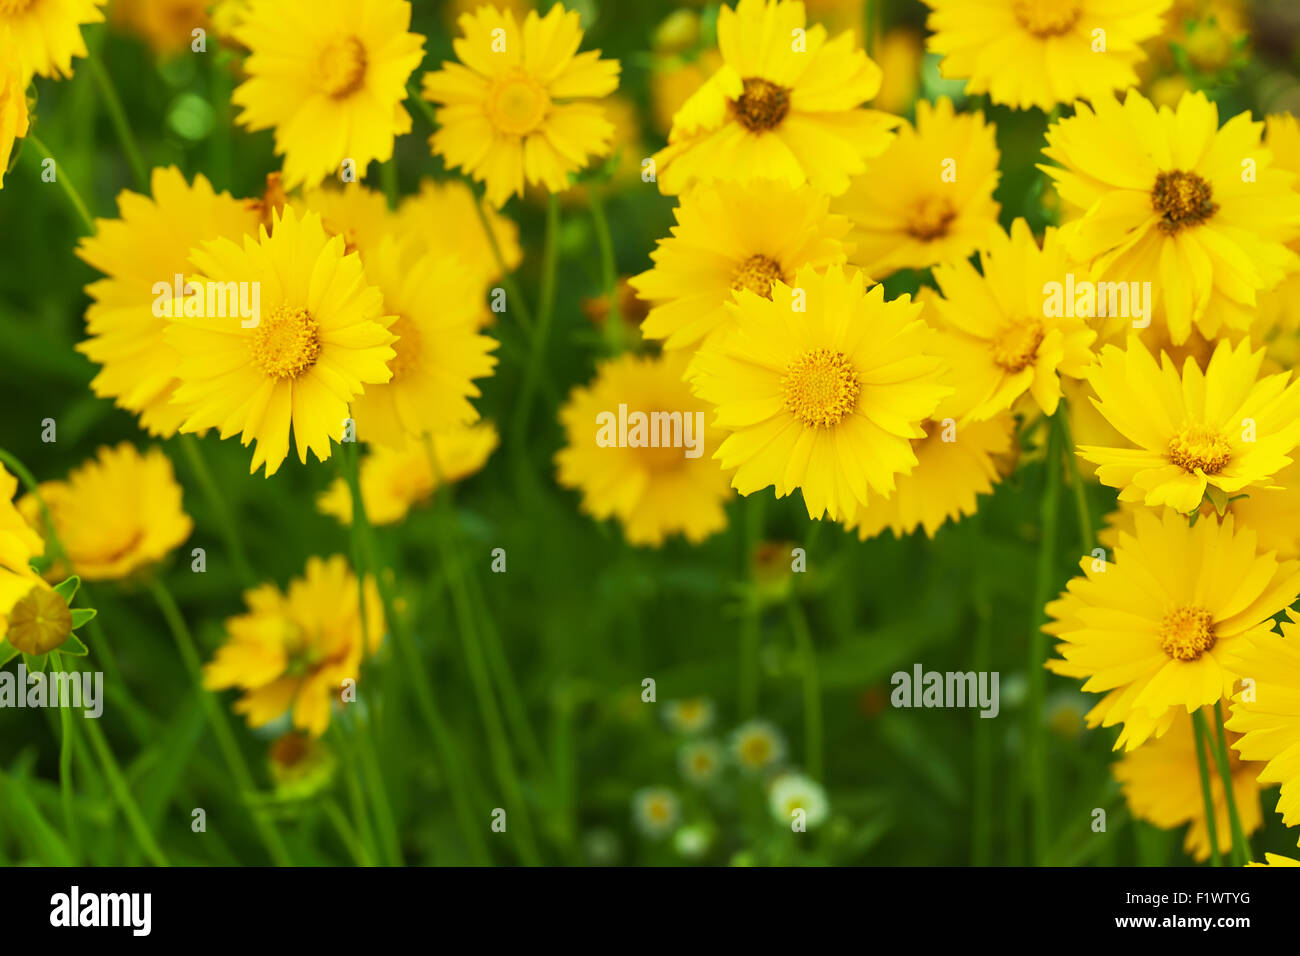 flowerbed with yellow flowers. Stock Photo